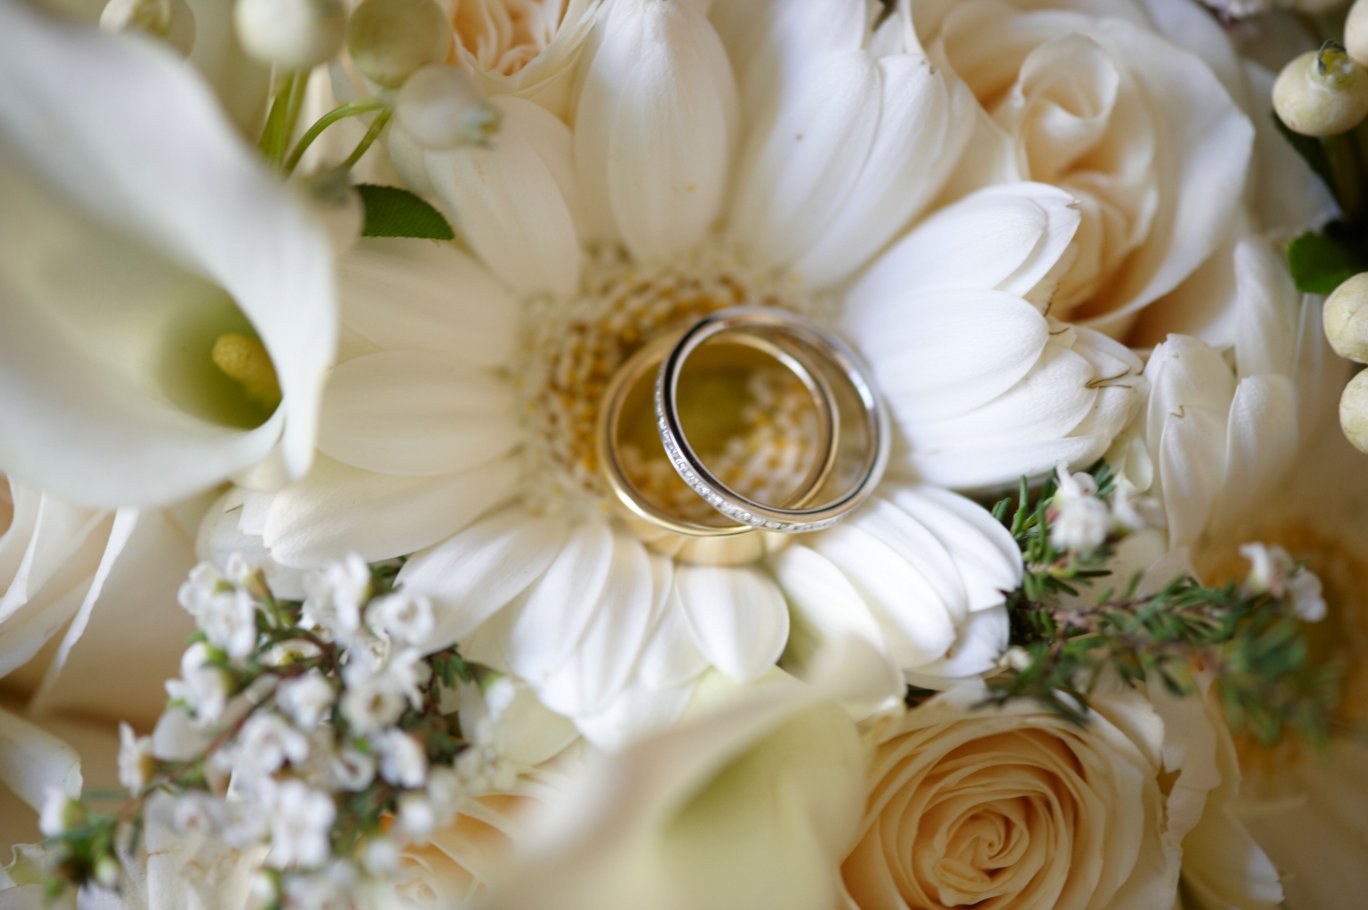 Wedding Rings on the Bridal Bouquet